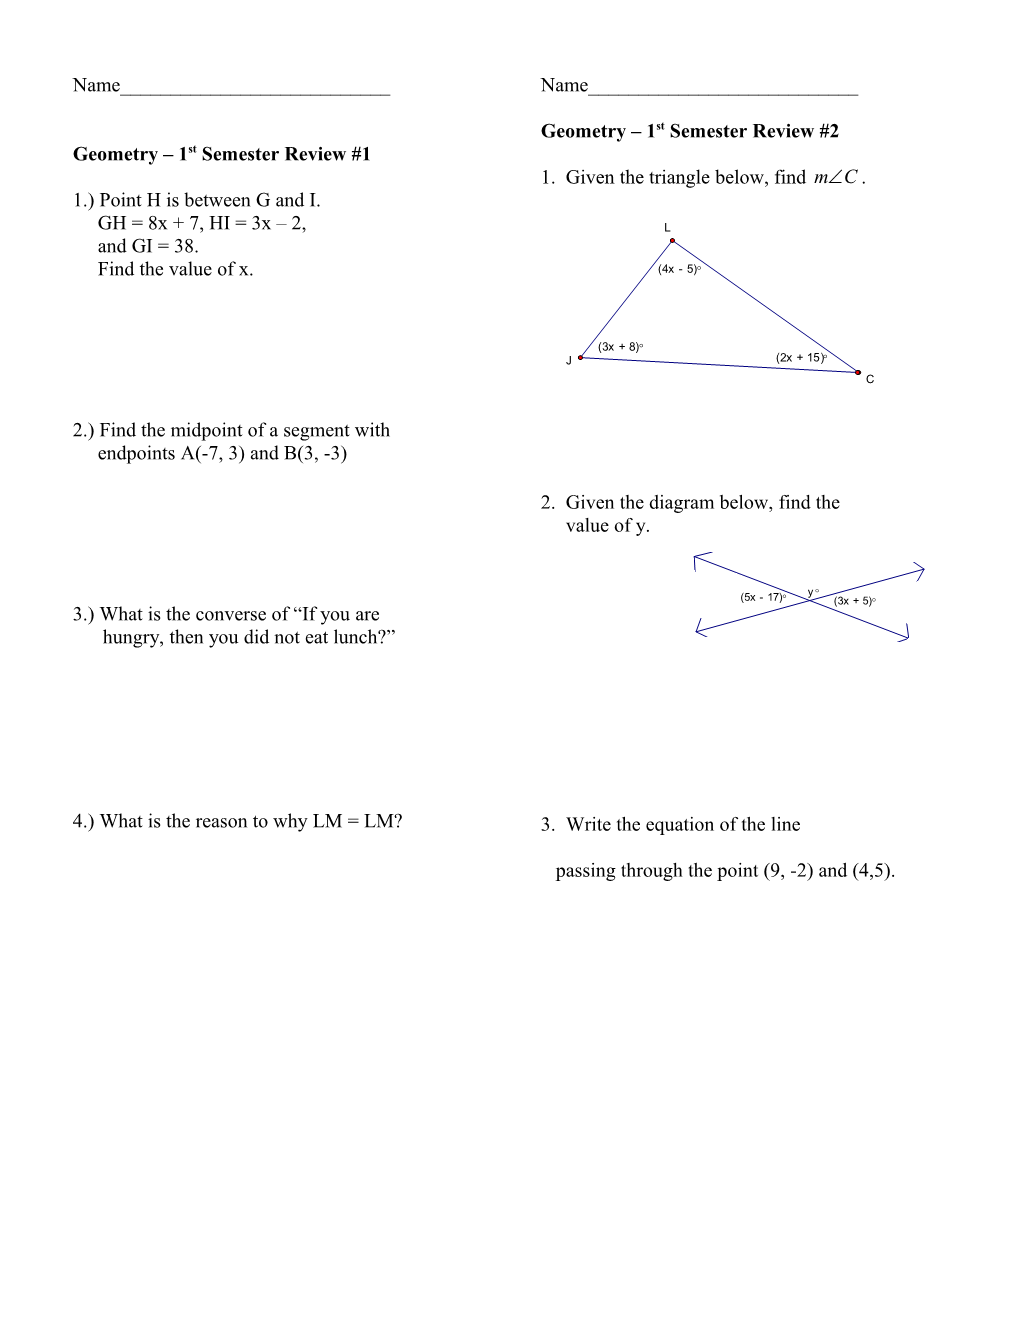 Geometry 1St Semester Review #1